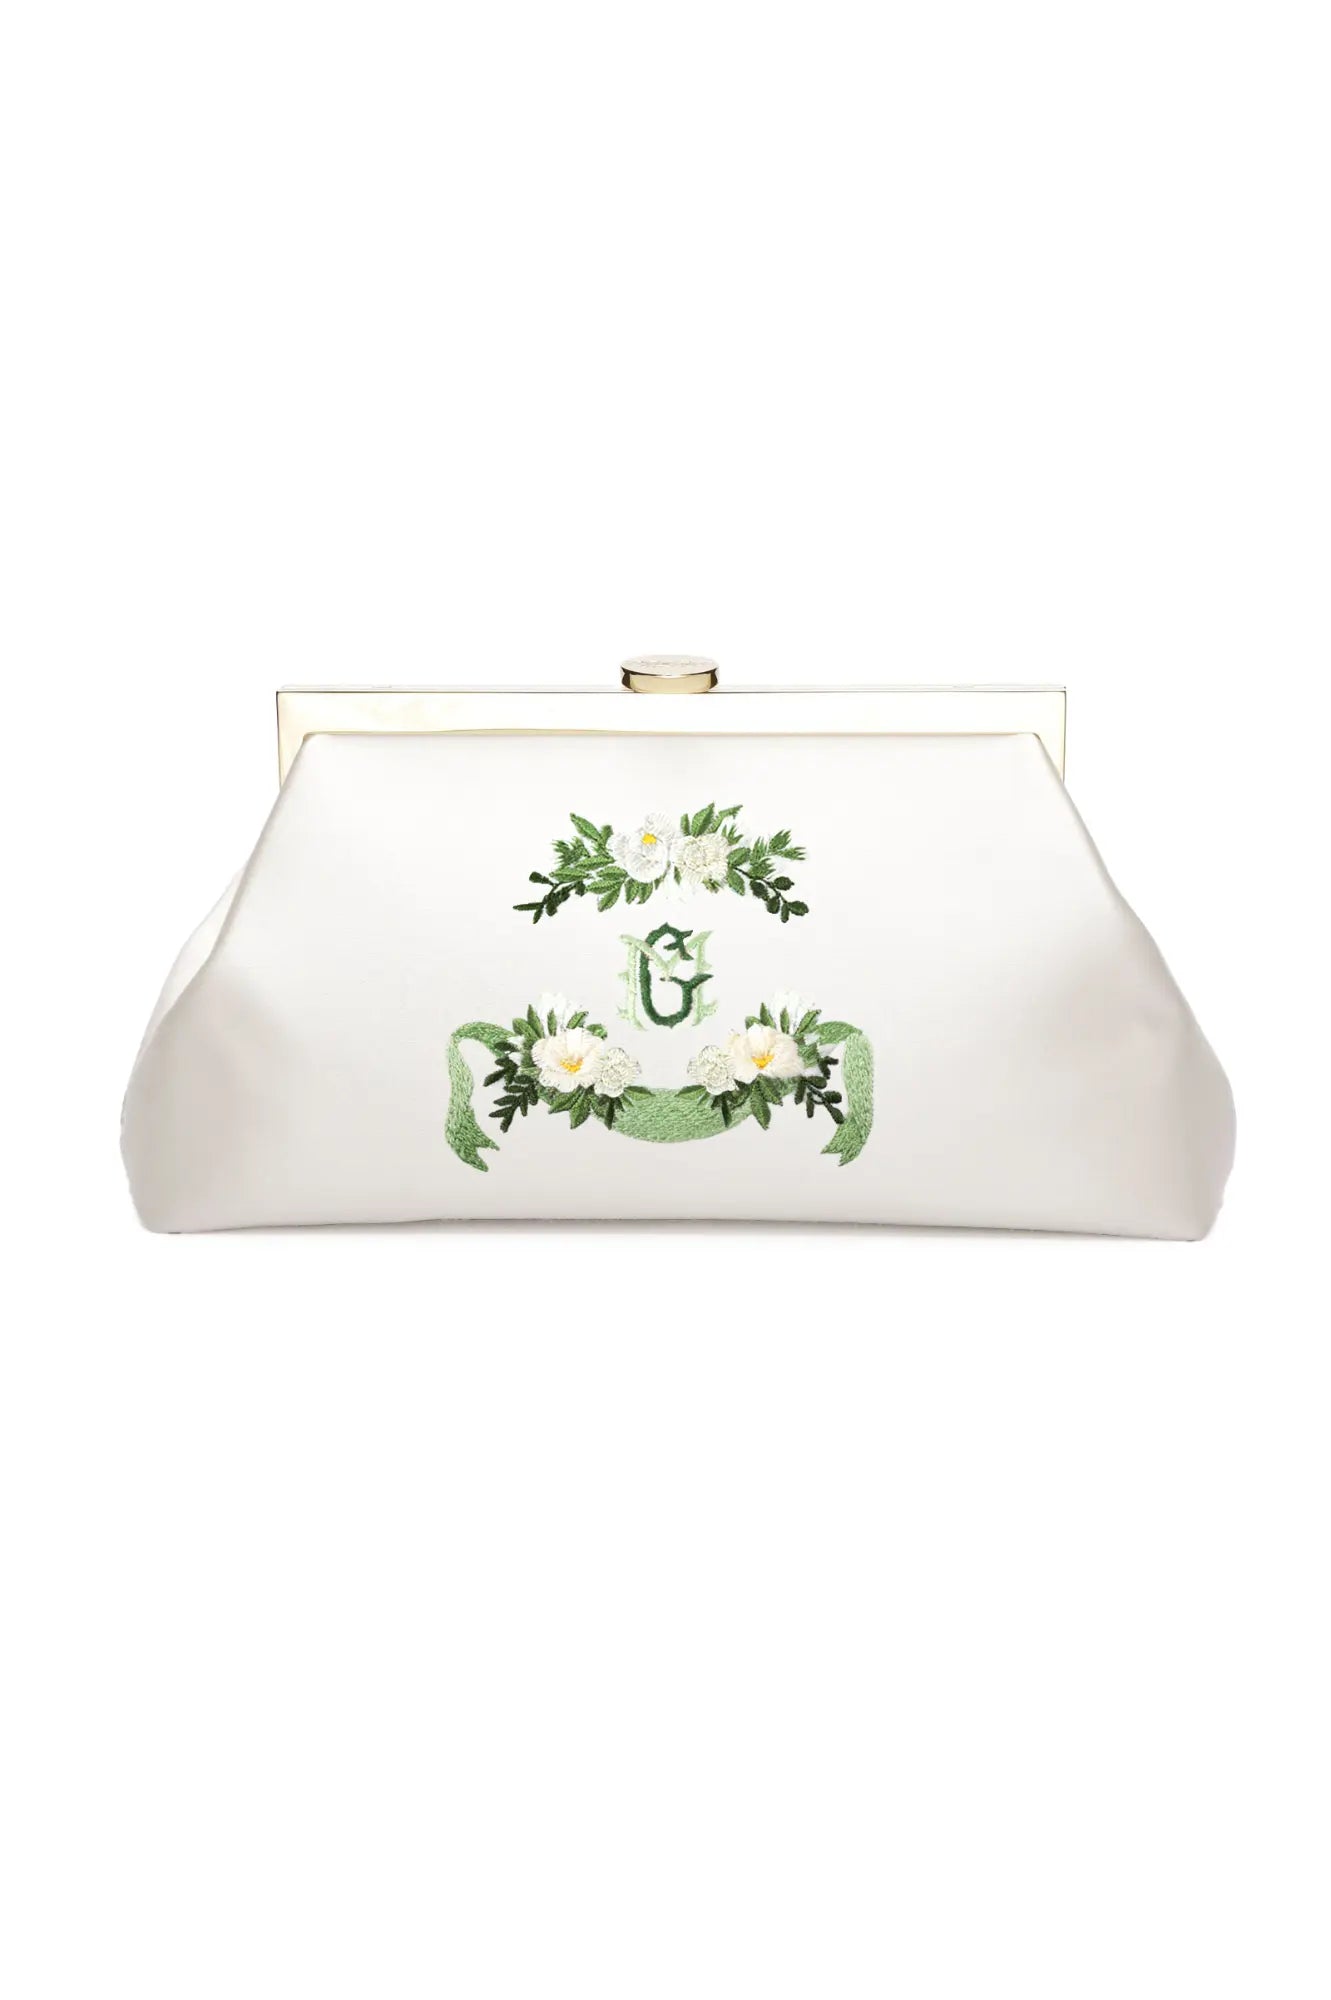 An elegant white The Bella Rosa Collection Rosa Clutch Monogram Embroidery with a floral embroidery design and a gold-tone clasp closure, perfect as a personalized wedding accessory.